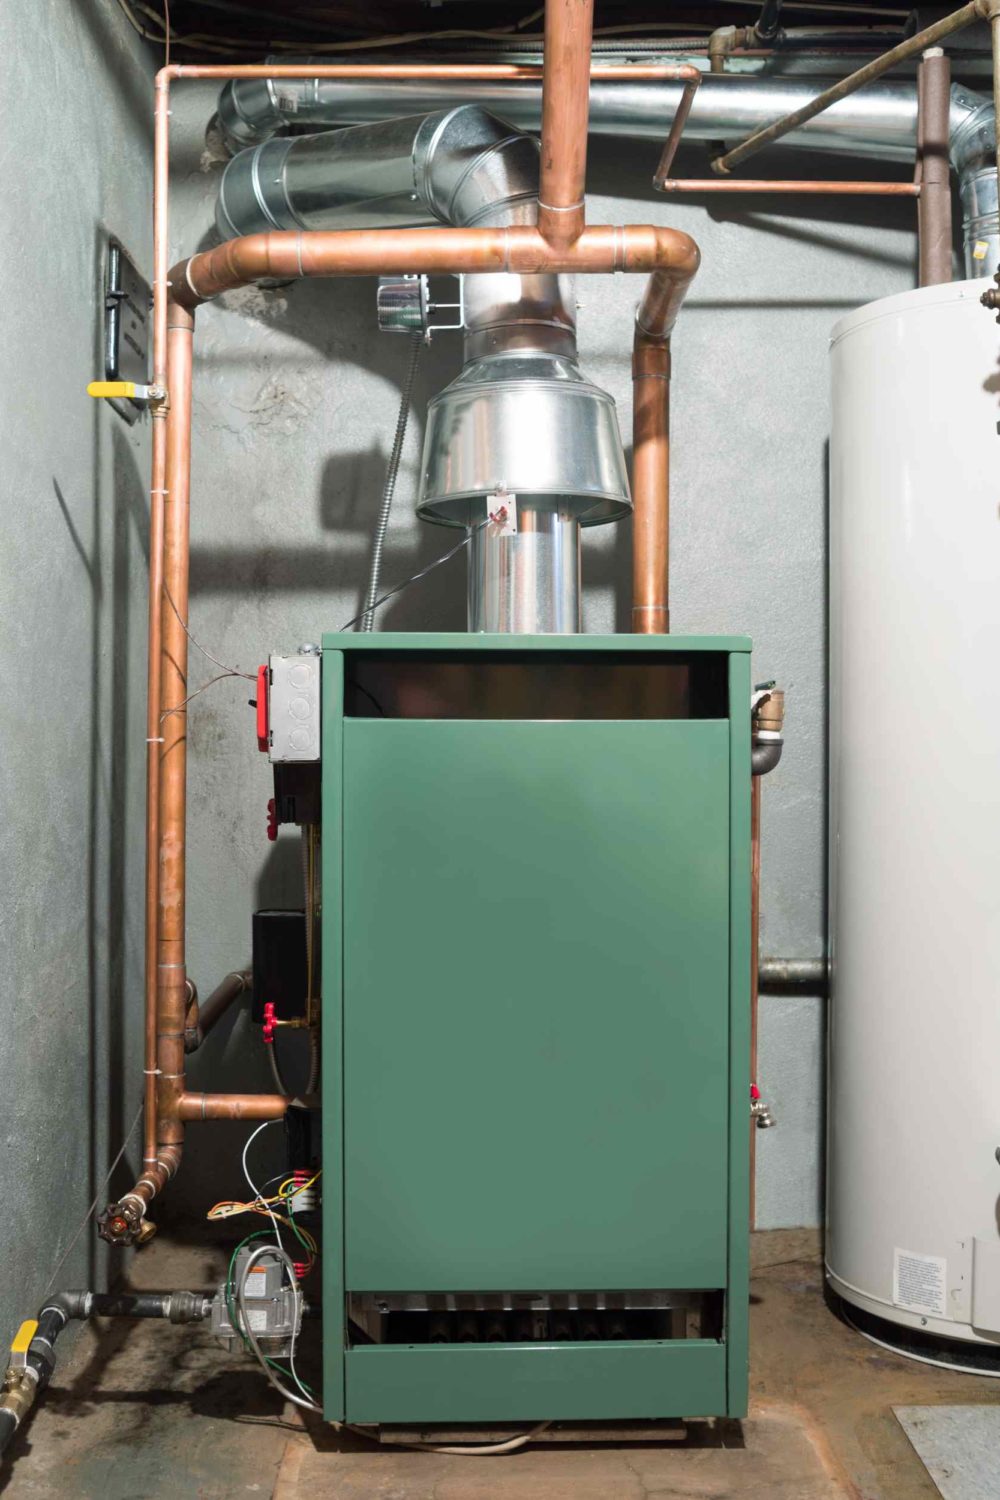 Safeguarding Your Home The Importance of Proper Furnace Maintenance